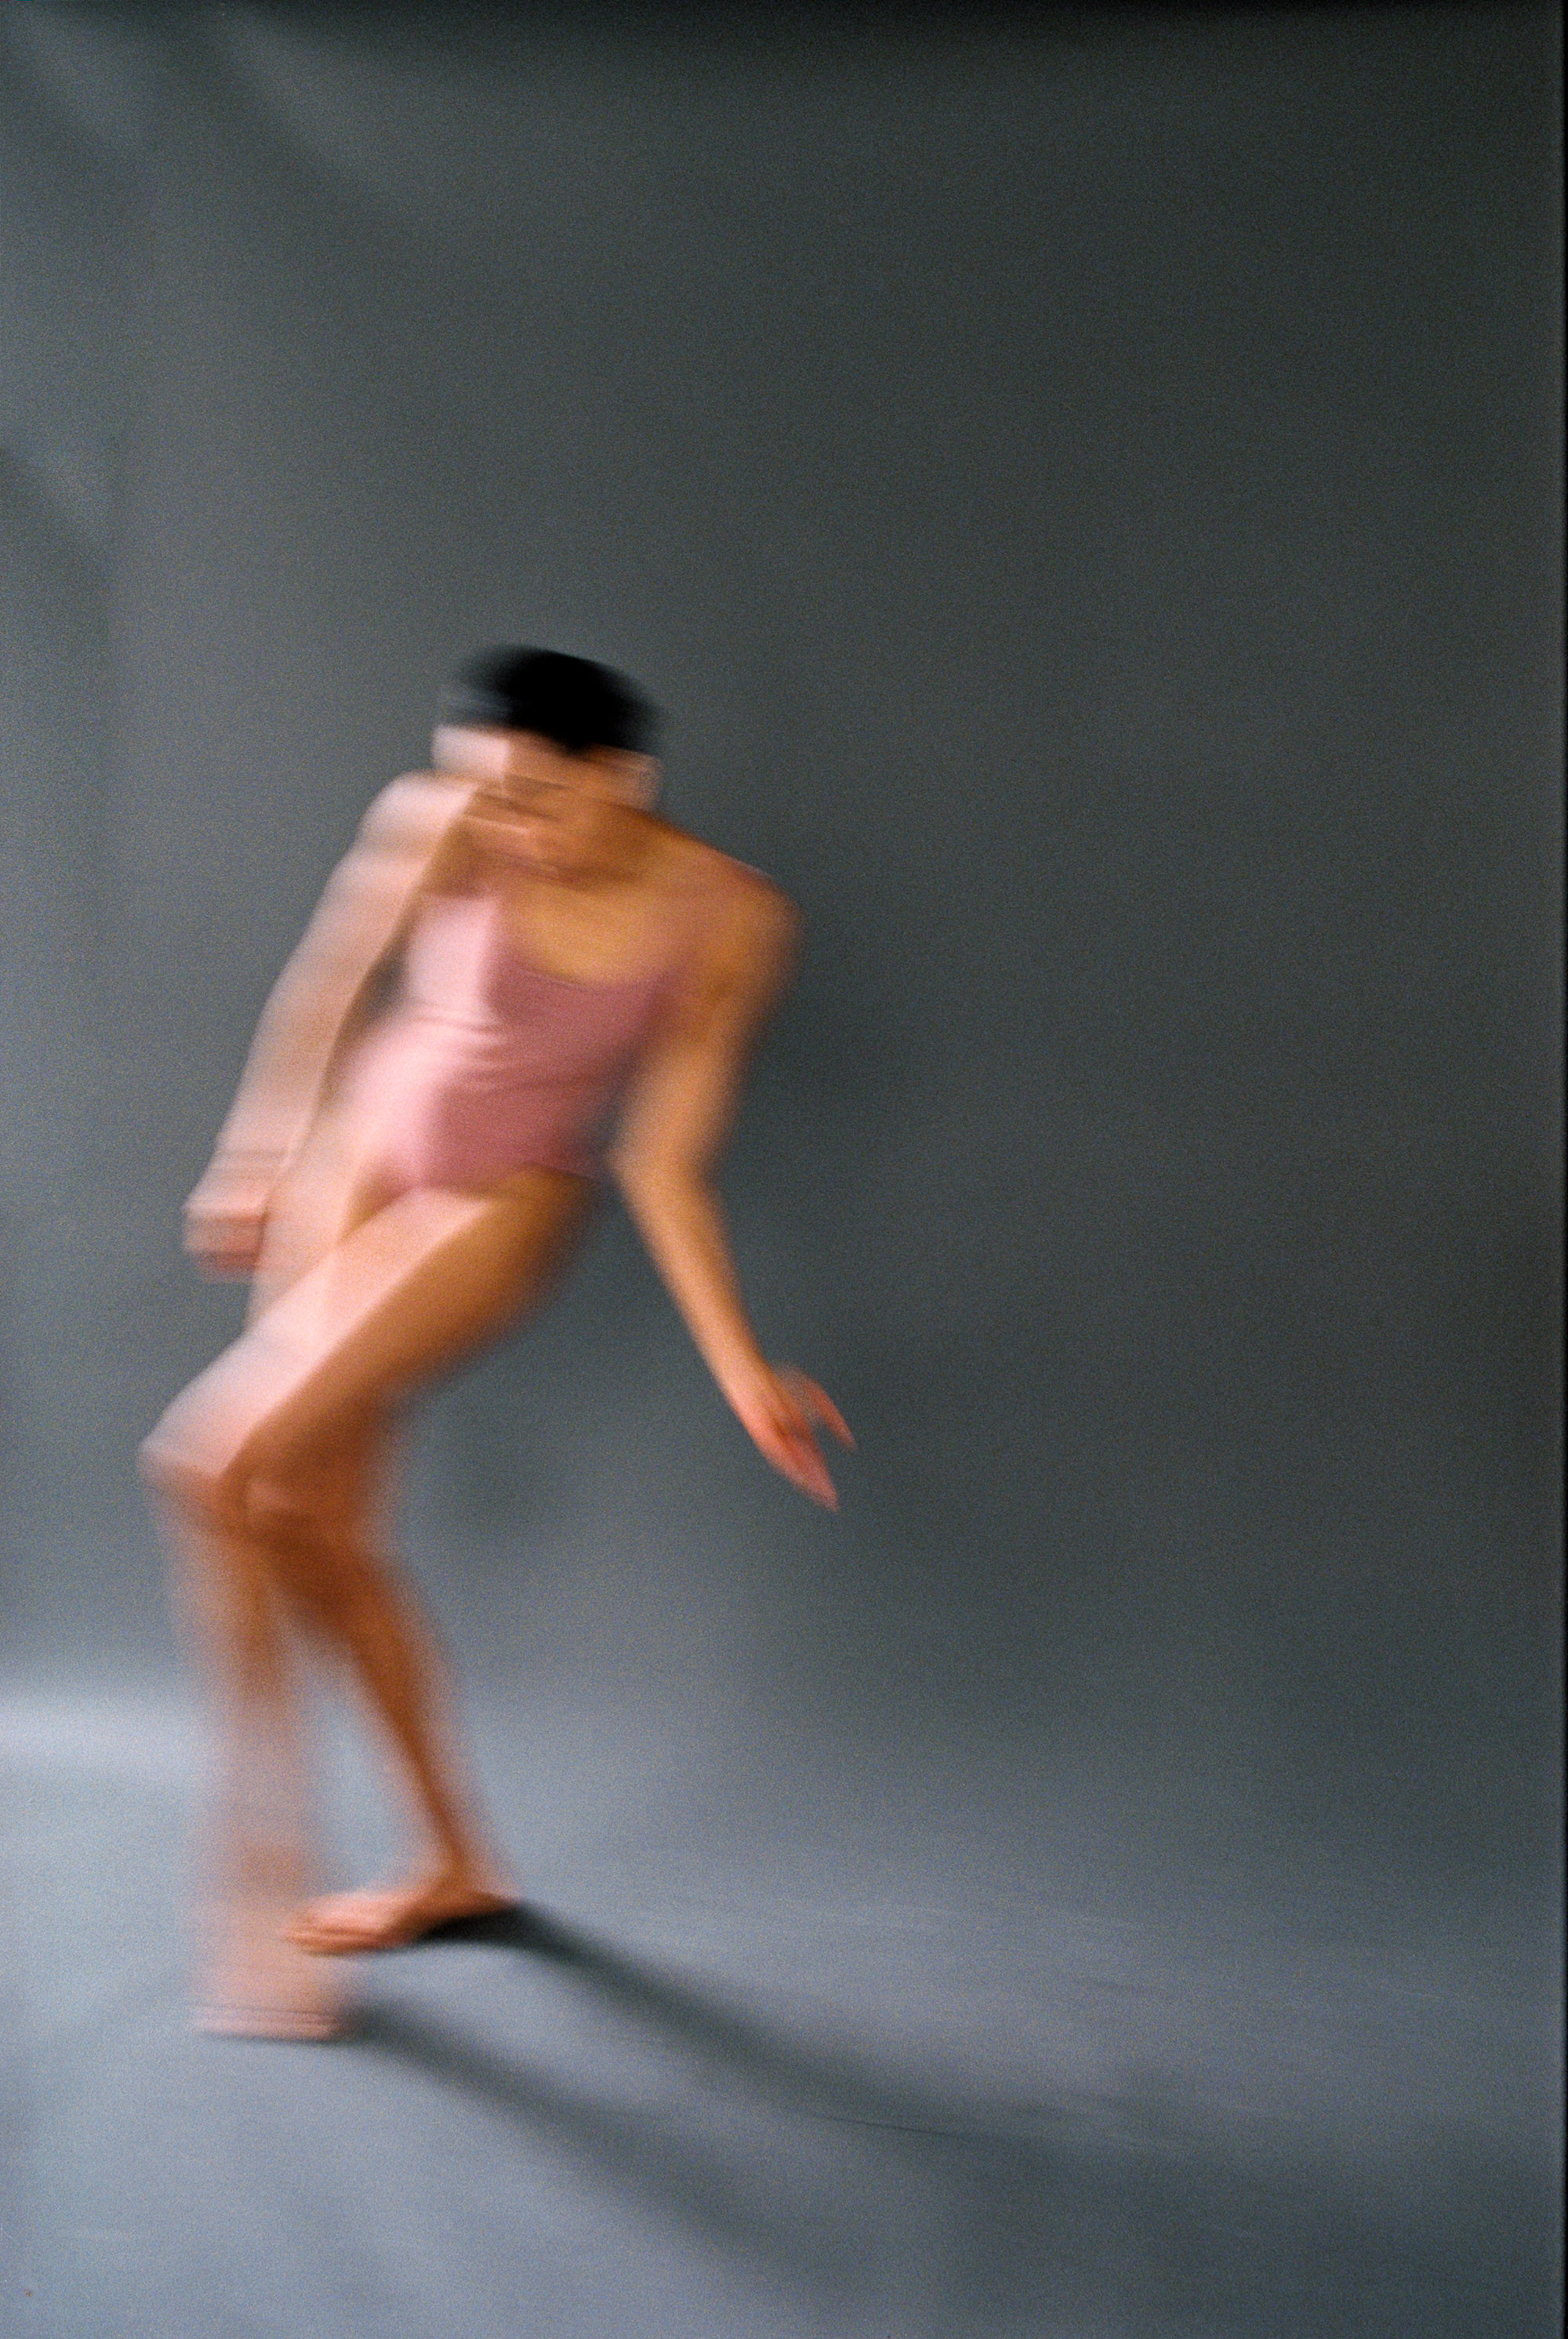 anna-peters-film-photographer-ballet-chapter-series-6-unearthing.tc.jpg